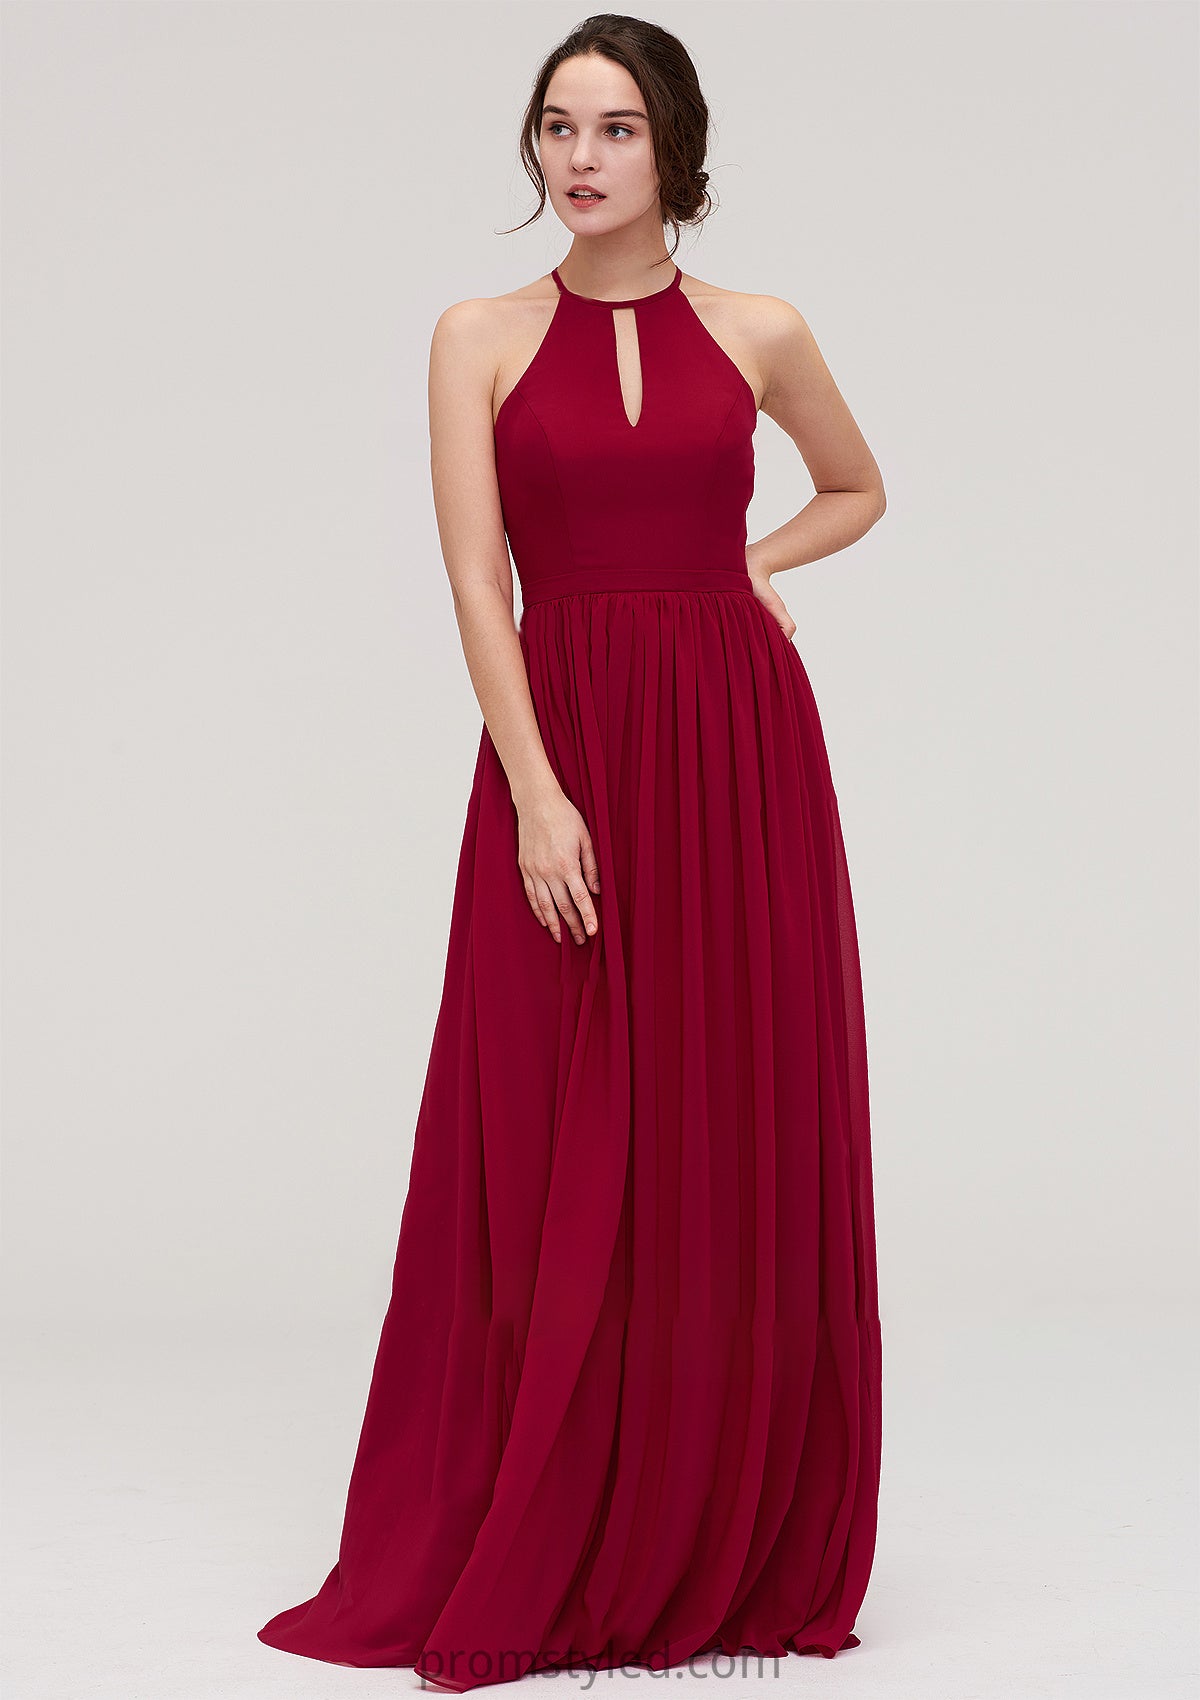 Scoop Neck Sleeveless A-line/Princess Long/Floor-Length Chiffon Bridesmaid Dresseses With Pleated Tori HLP0025456